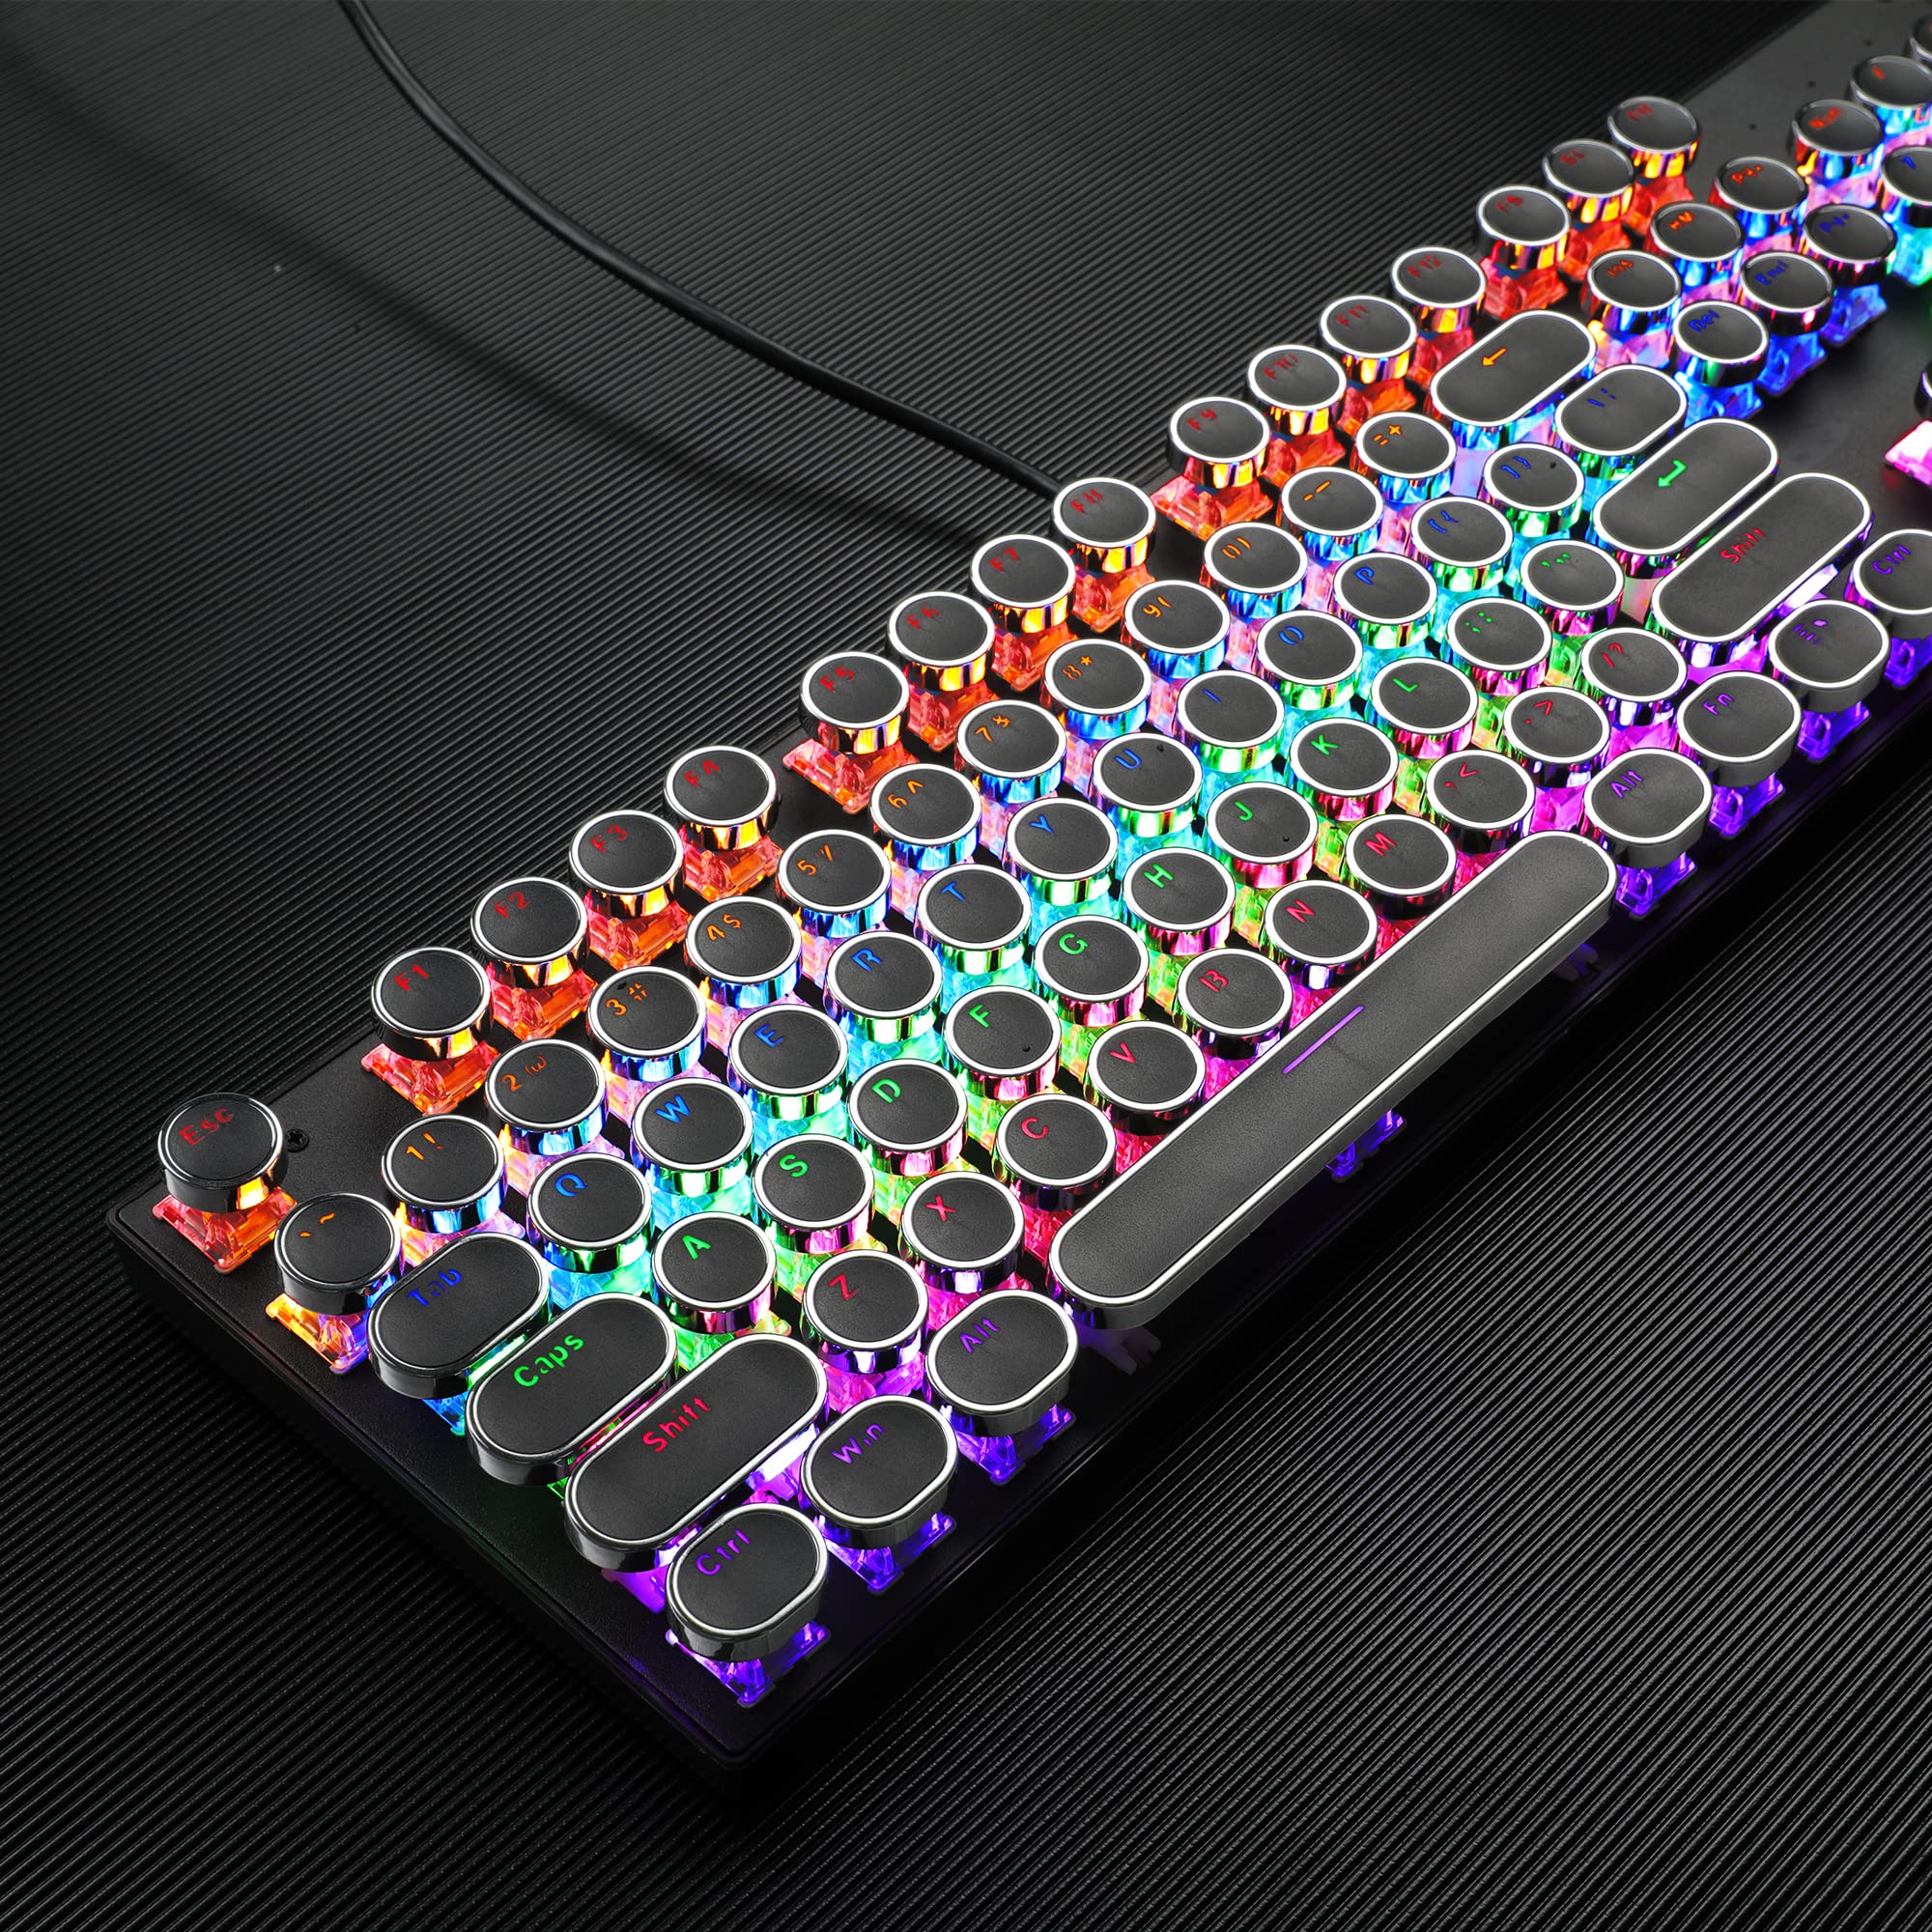 MageGee Typewriter Mechanical Gaming Keyboard, Retro Punk Round Keycaps with RGB Rainbow Backlit USB Wired Keyboards for Game and Office, for Windows Laptop PC Mac - Blue Switches/Black